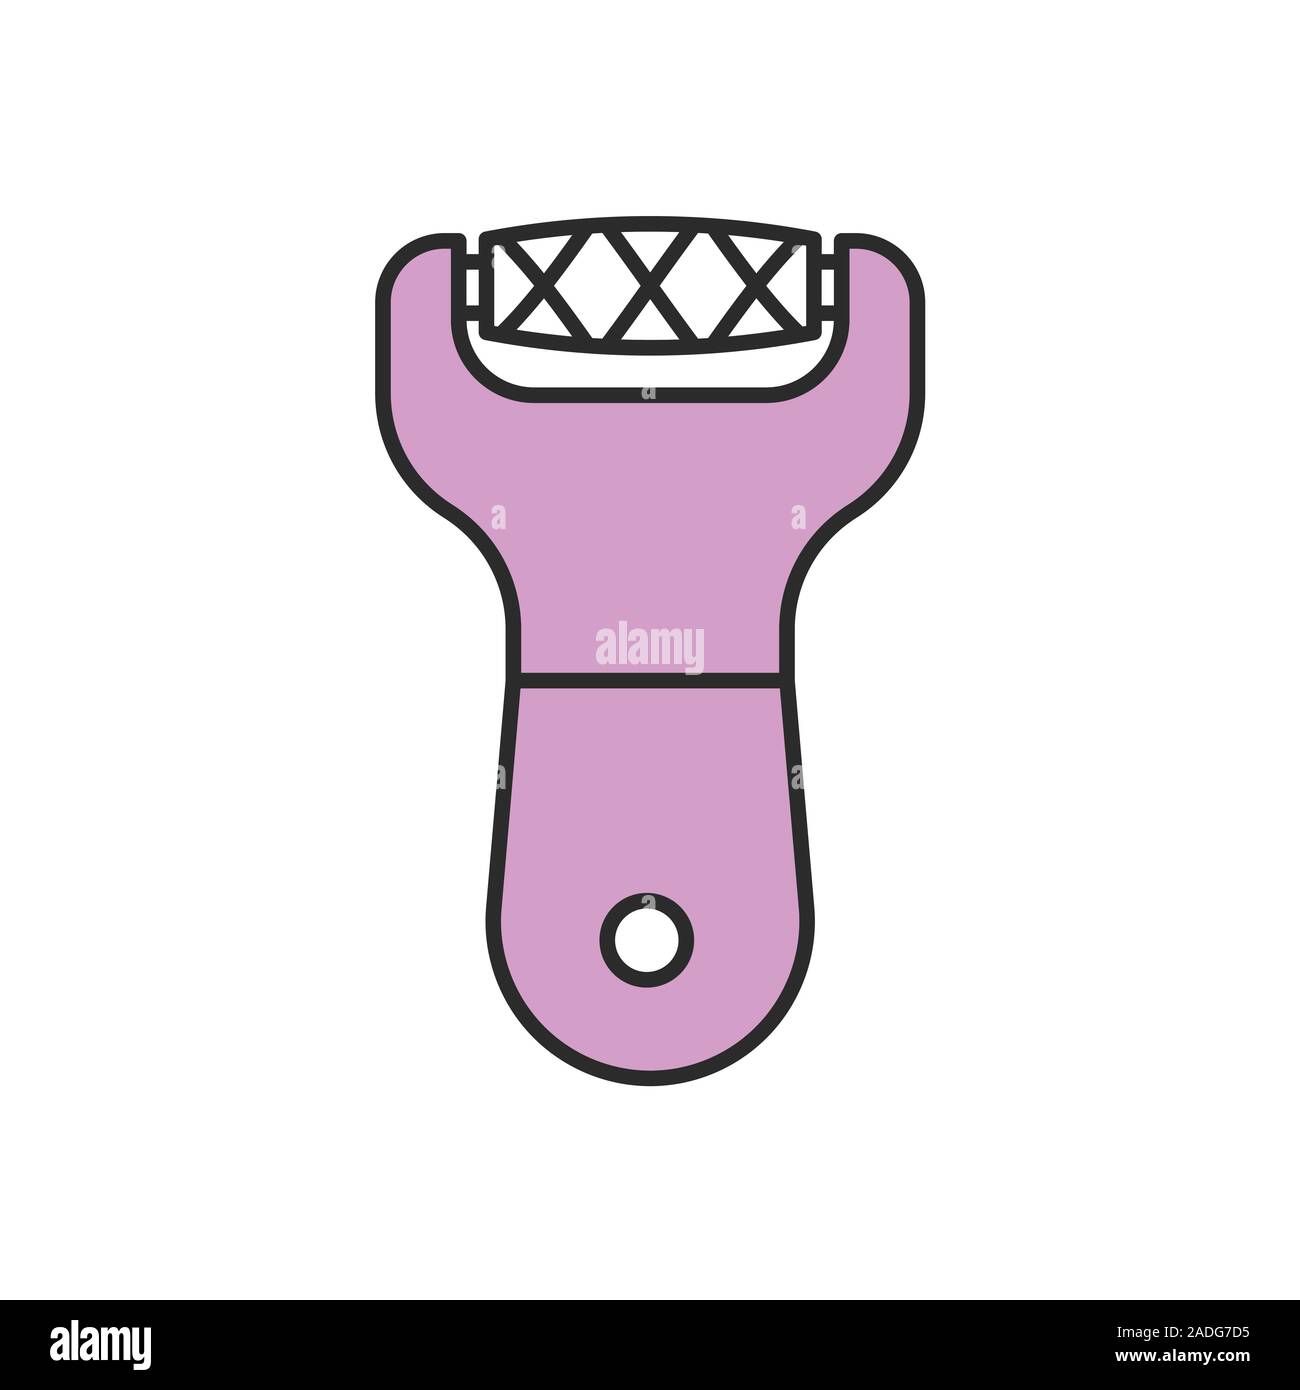 https://c8.alamy.com/comp/2ADG7D5/foot-file-color-icon-foot-scrubber-isolated-vector-illustration-2ADG7D5.jpg